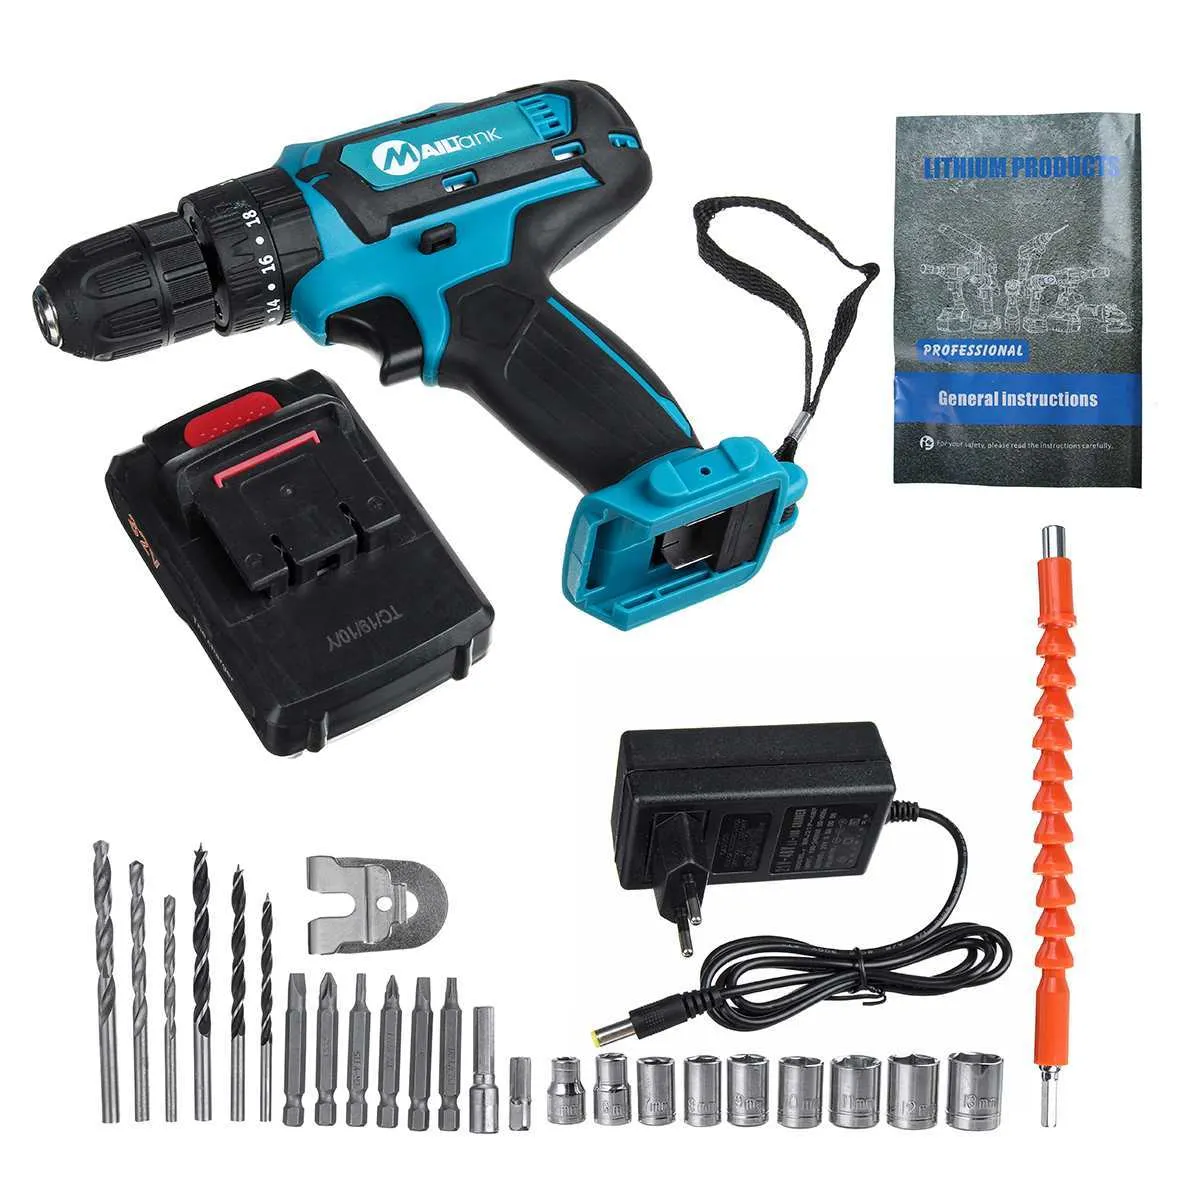 Electric Drill Cordless Drill 32V 2 Speed 3 IN1 Electric Screwdriver Hammer Power Driver with 1 Lithium-Ion Battery Power Tool 201225